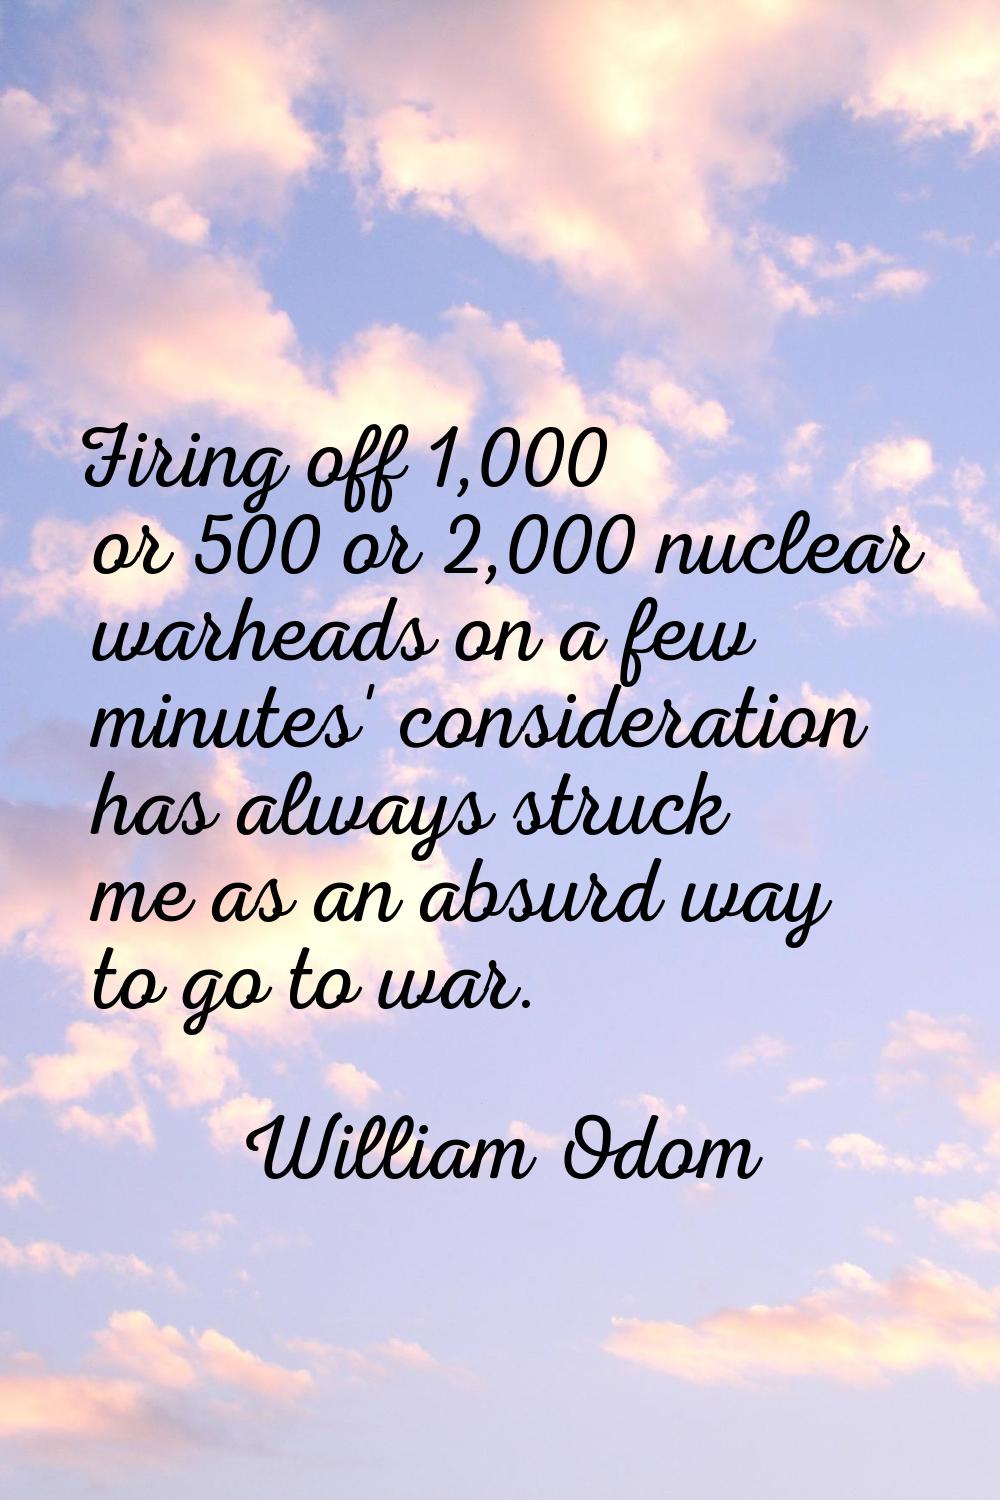 Firing off 1,000 or 500 or 2,000 nuclear warheads on a few minutes' consideration has always struck